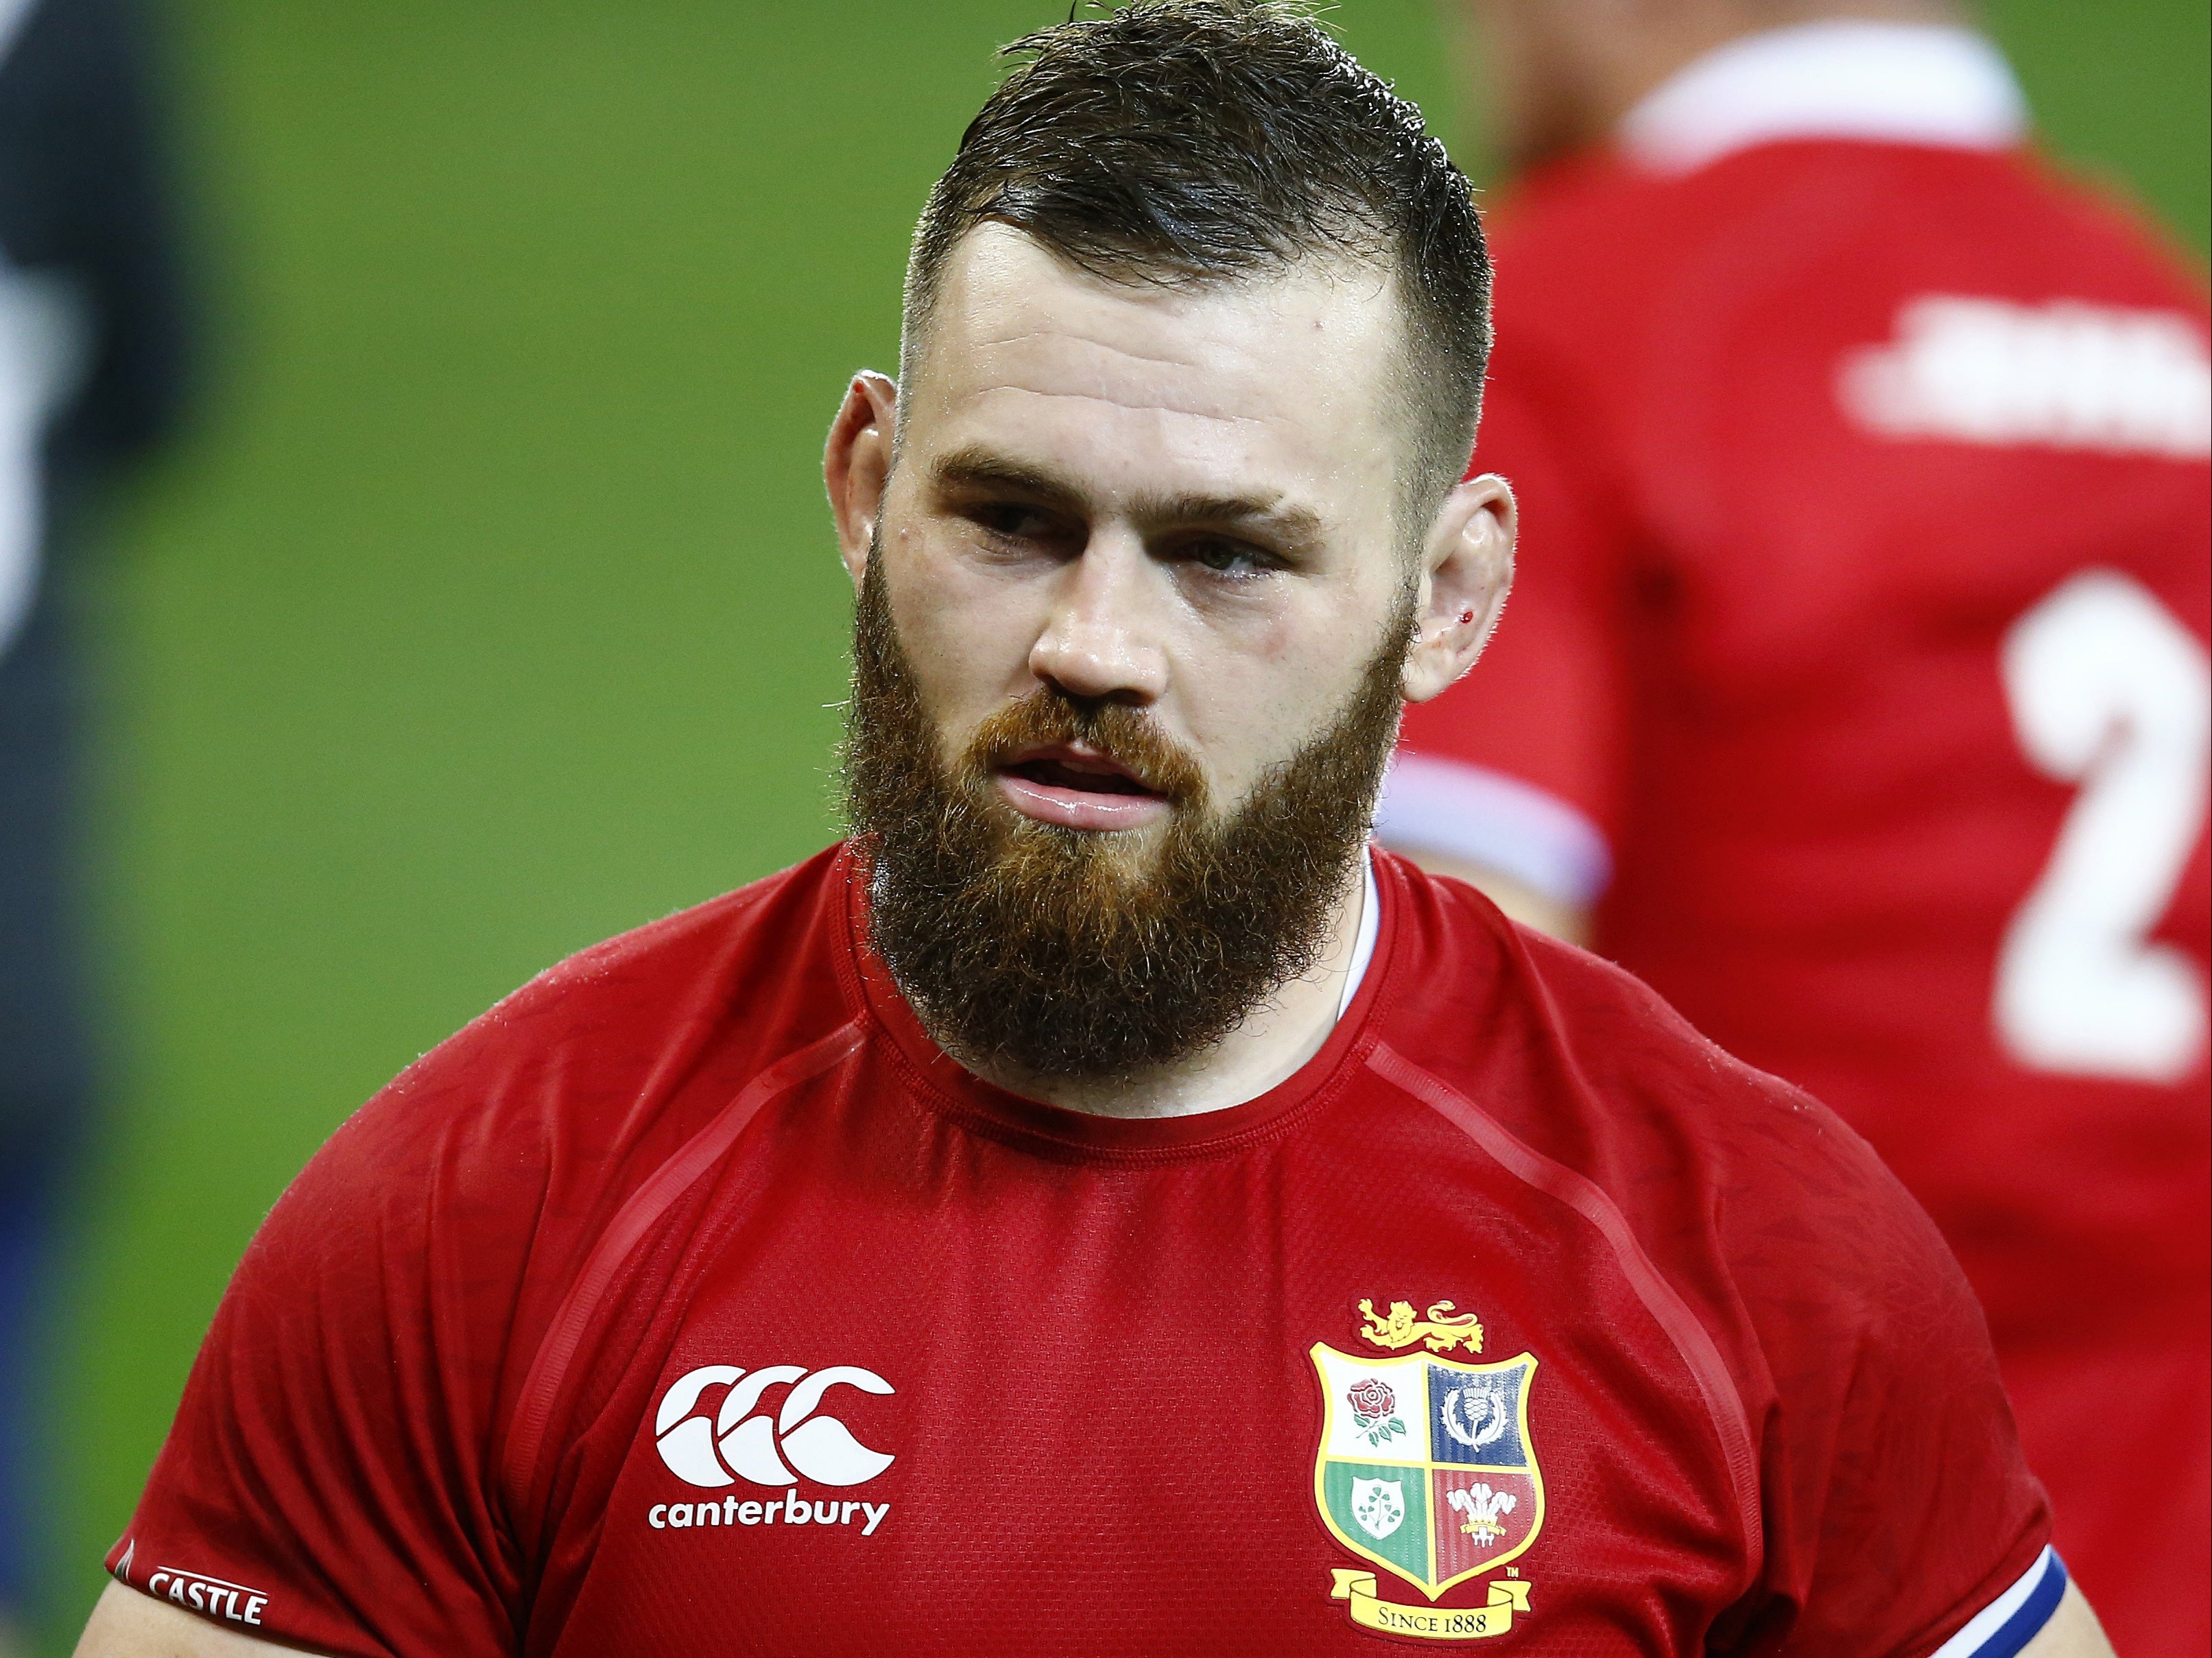 Luke Cowan-Dickie was the Lions' star performer against the Stormers